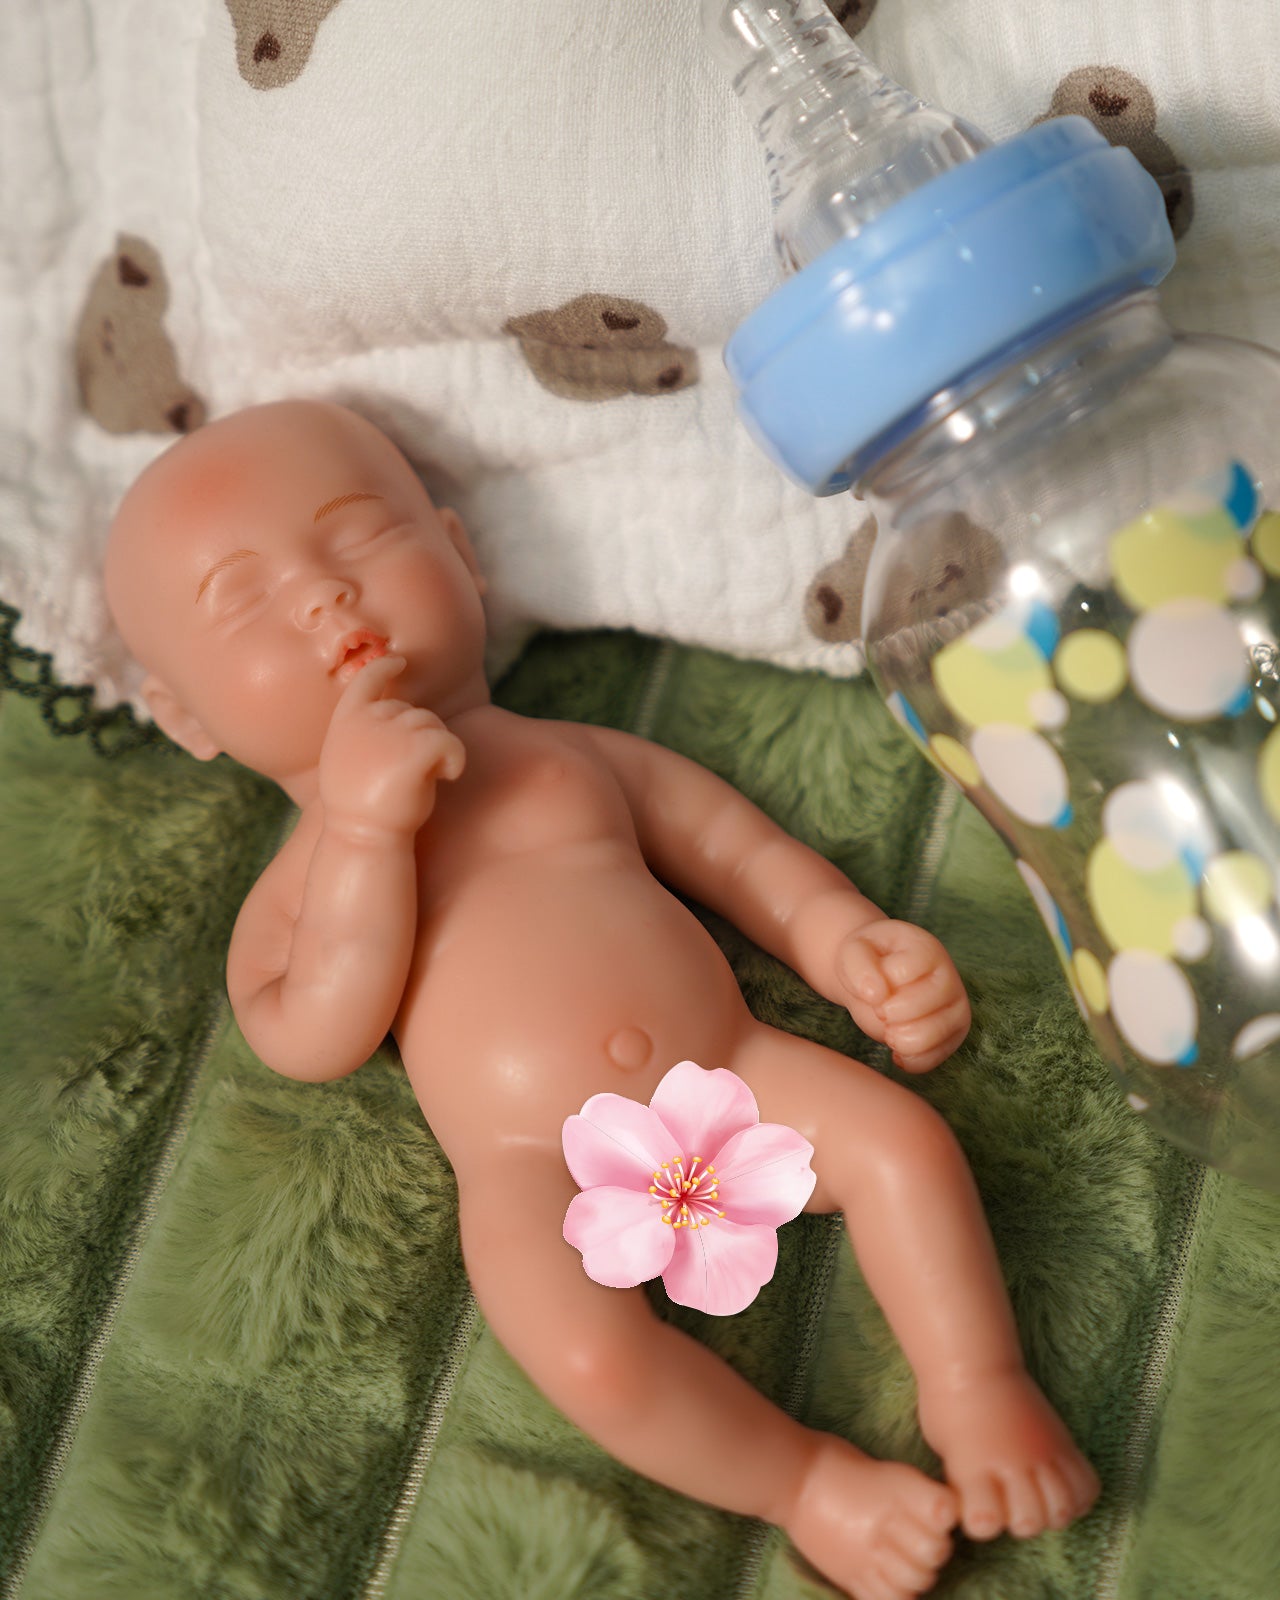 13 Full Solid Silicone Bebe Reborn Doll Painted Can Drink